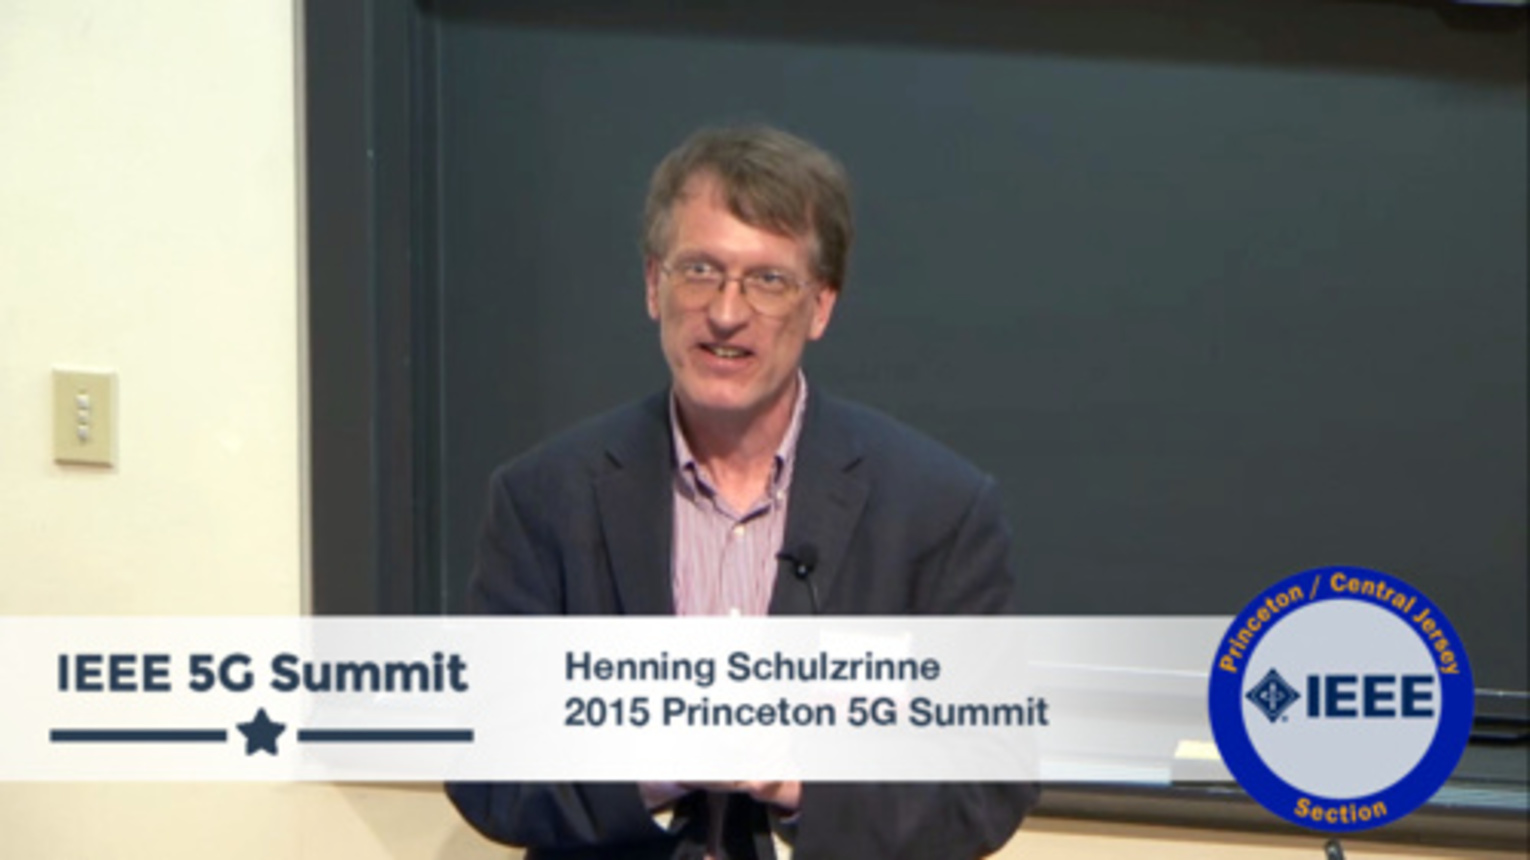 Princeton 5G Summit - Henning Schulzrinne Keynote - Learning From Our Mistakes